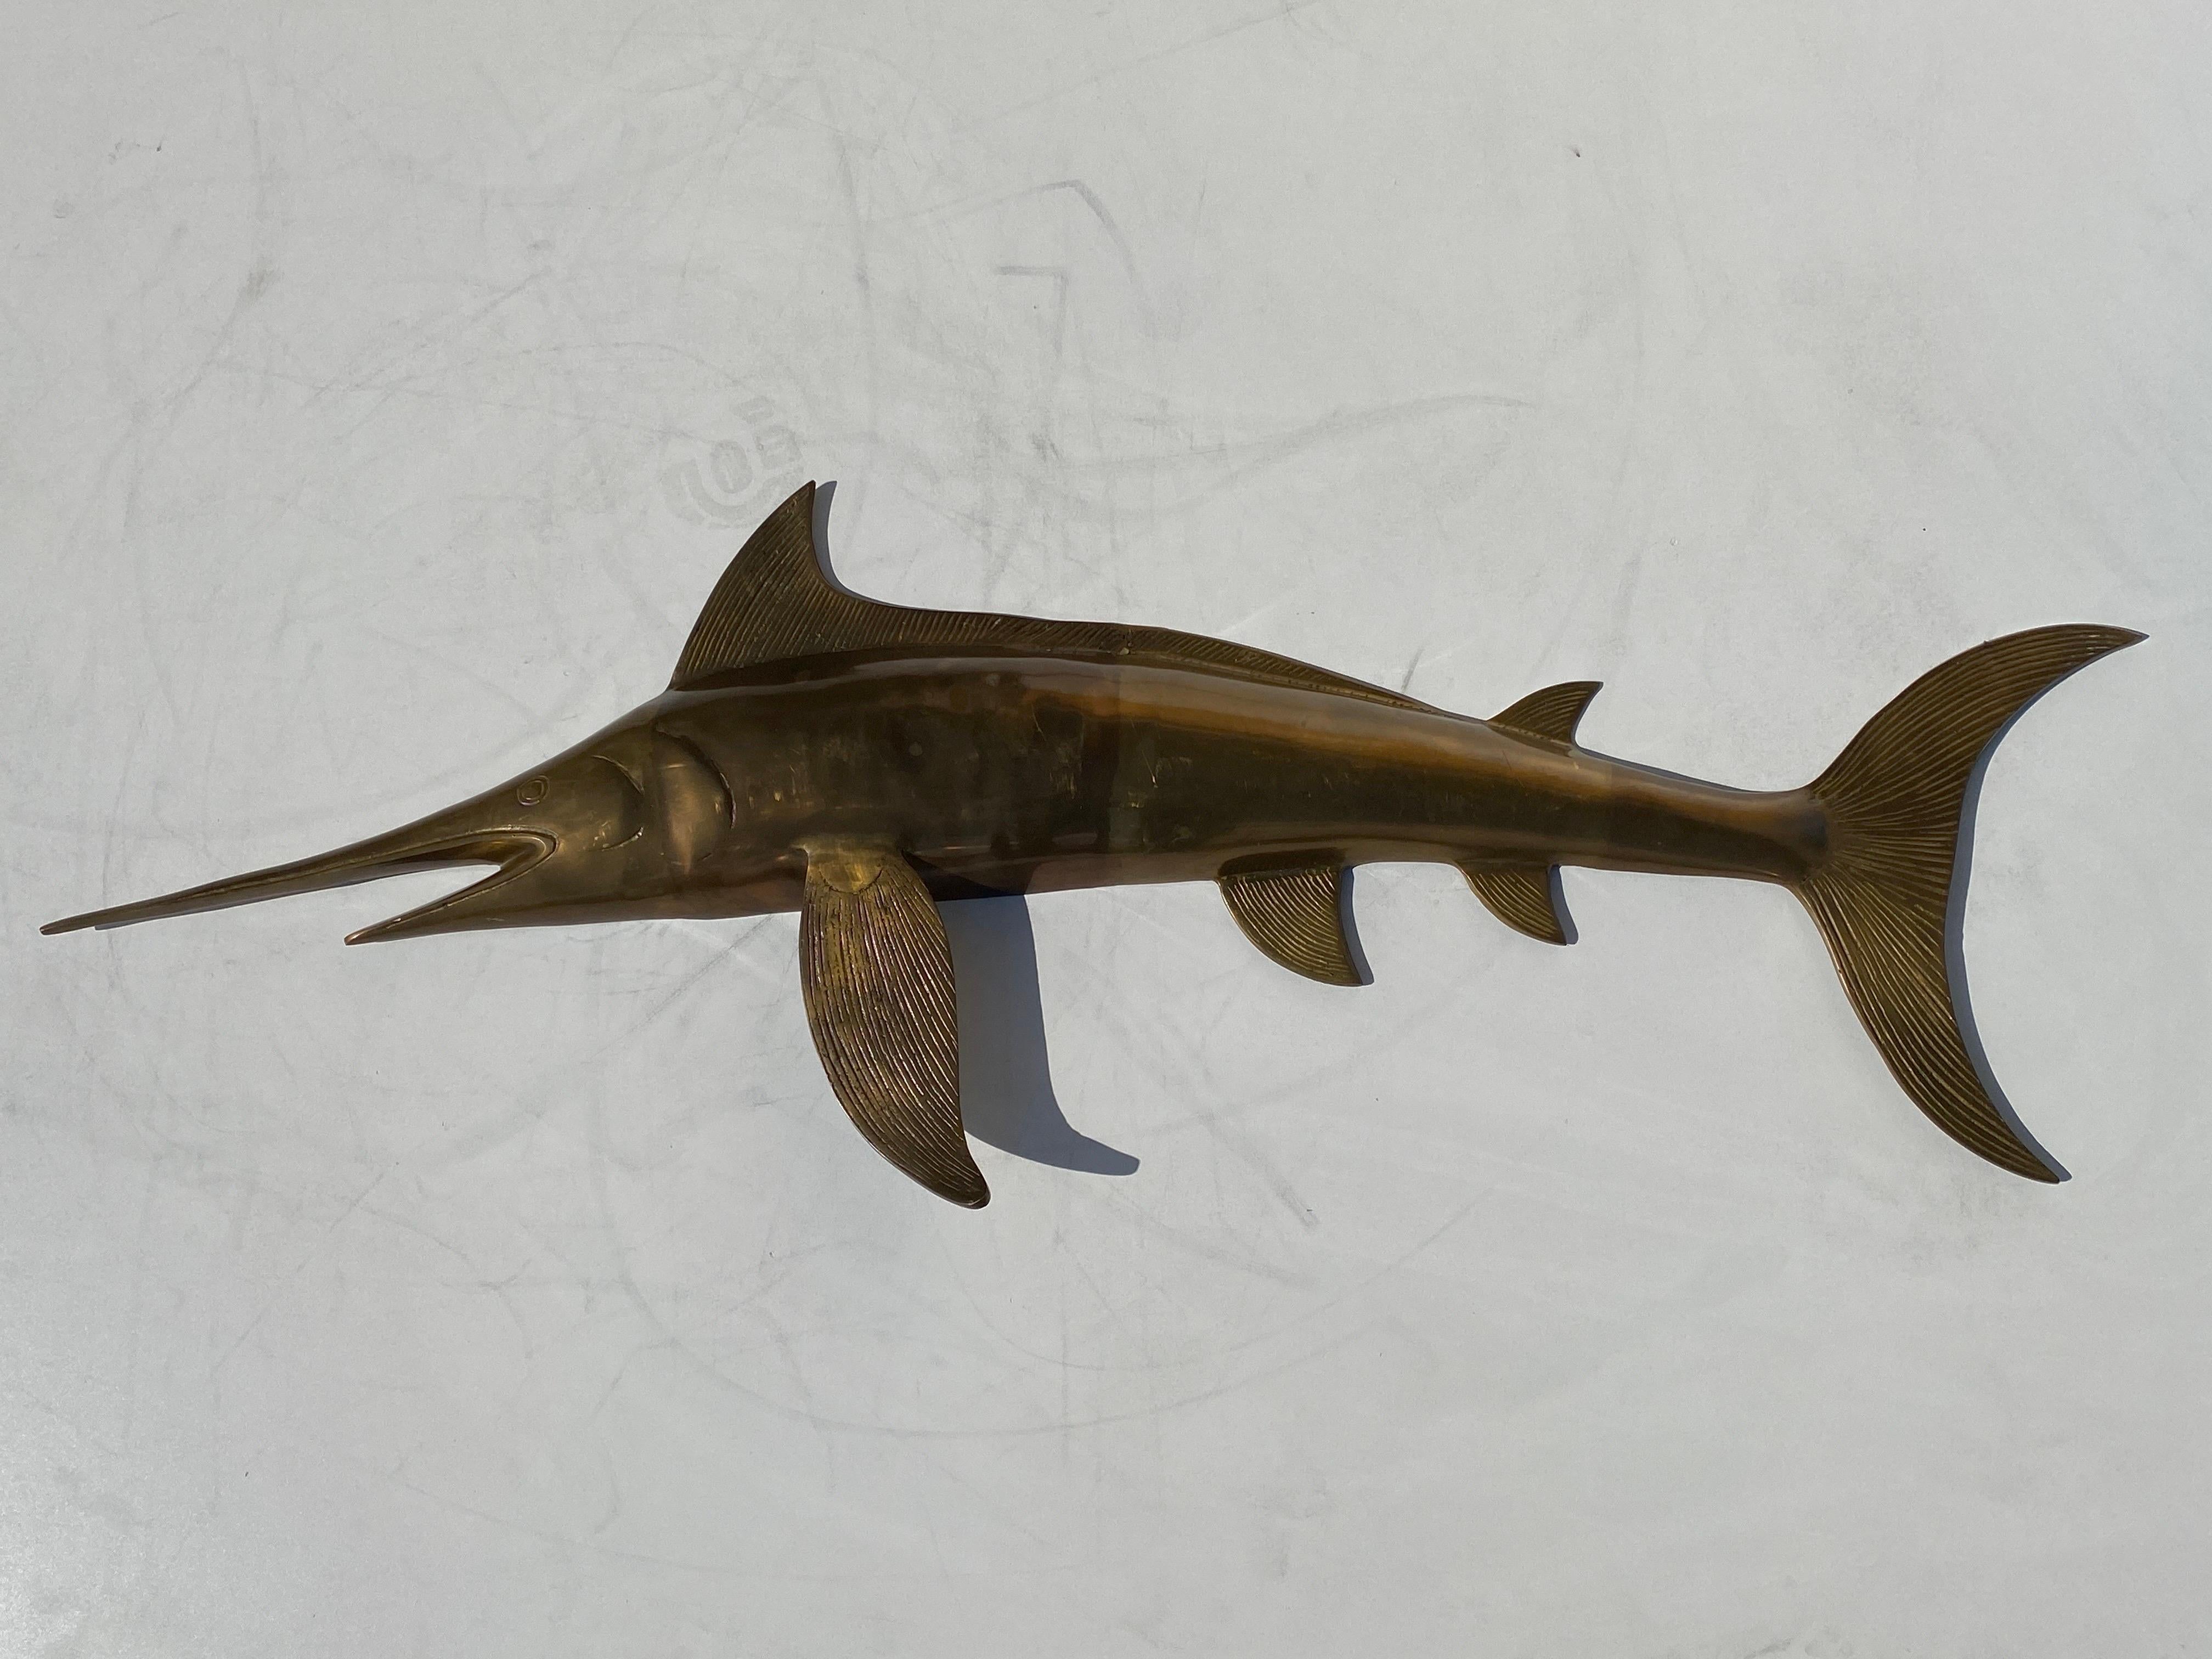 Patinated brass wall hanging sculpture of a swordfish. Shabby Chic - Beach decor.